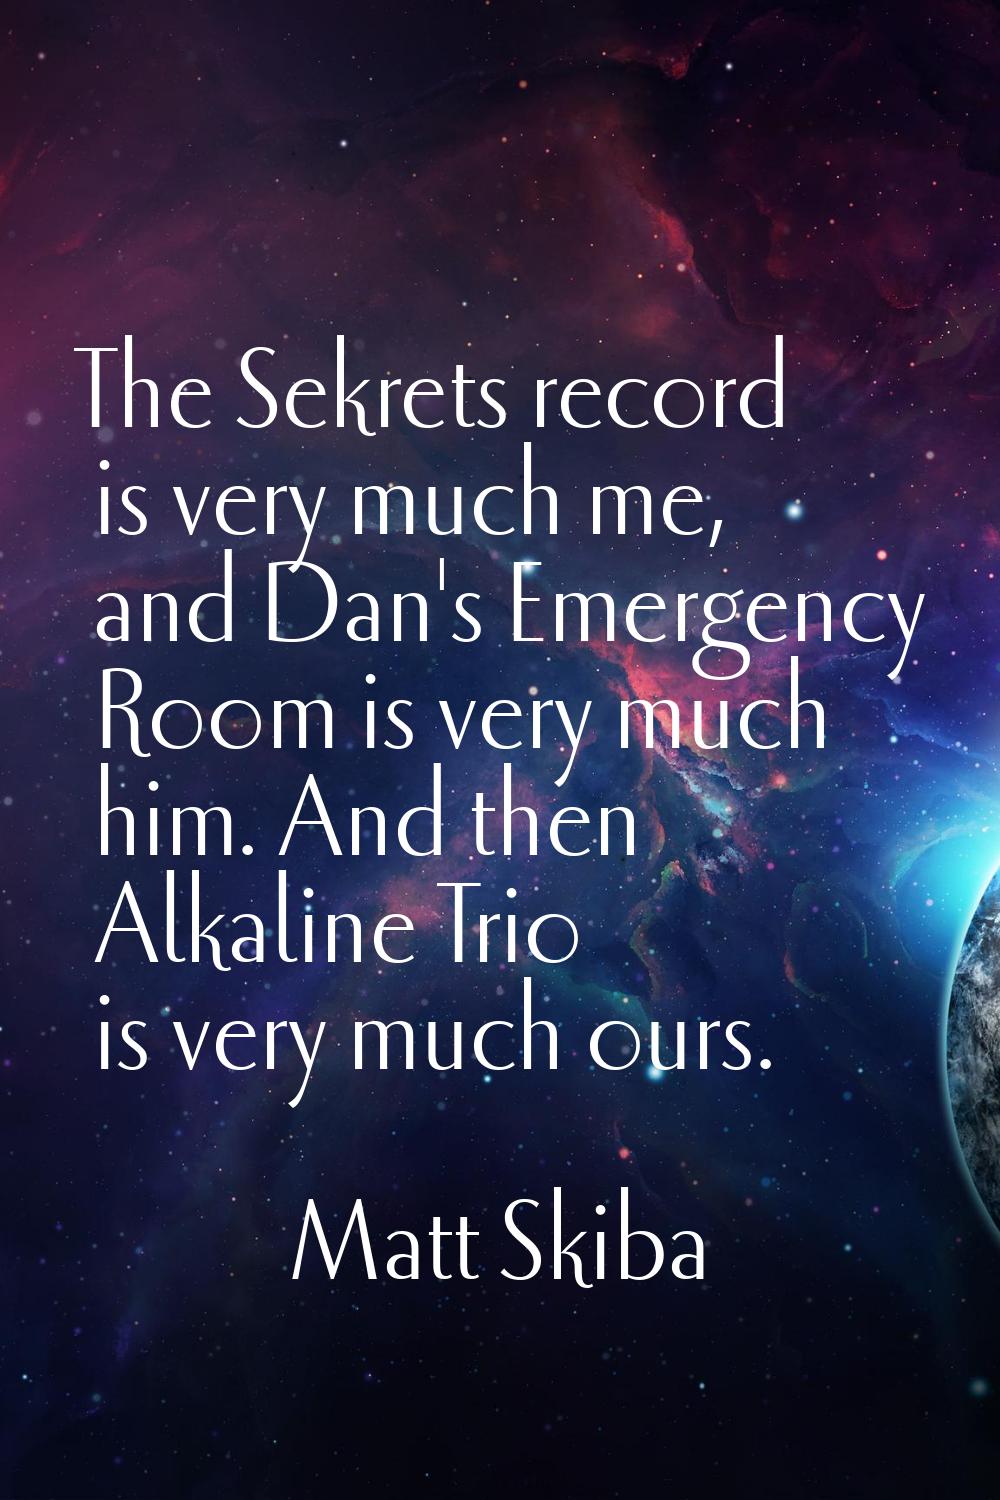 The Sekrets record is very much me, and Dan's Emergency Room is very much him. And then Alkaline Tr